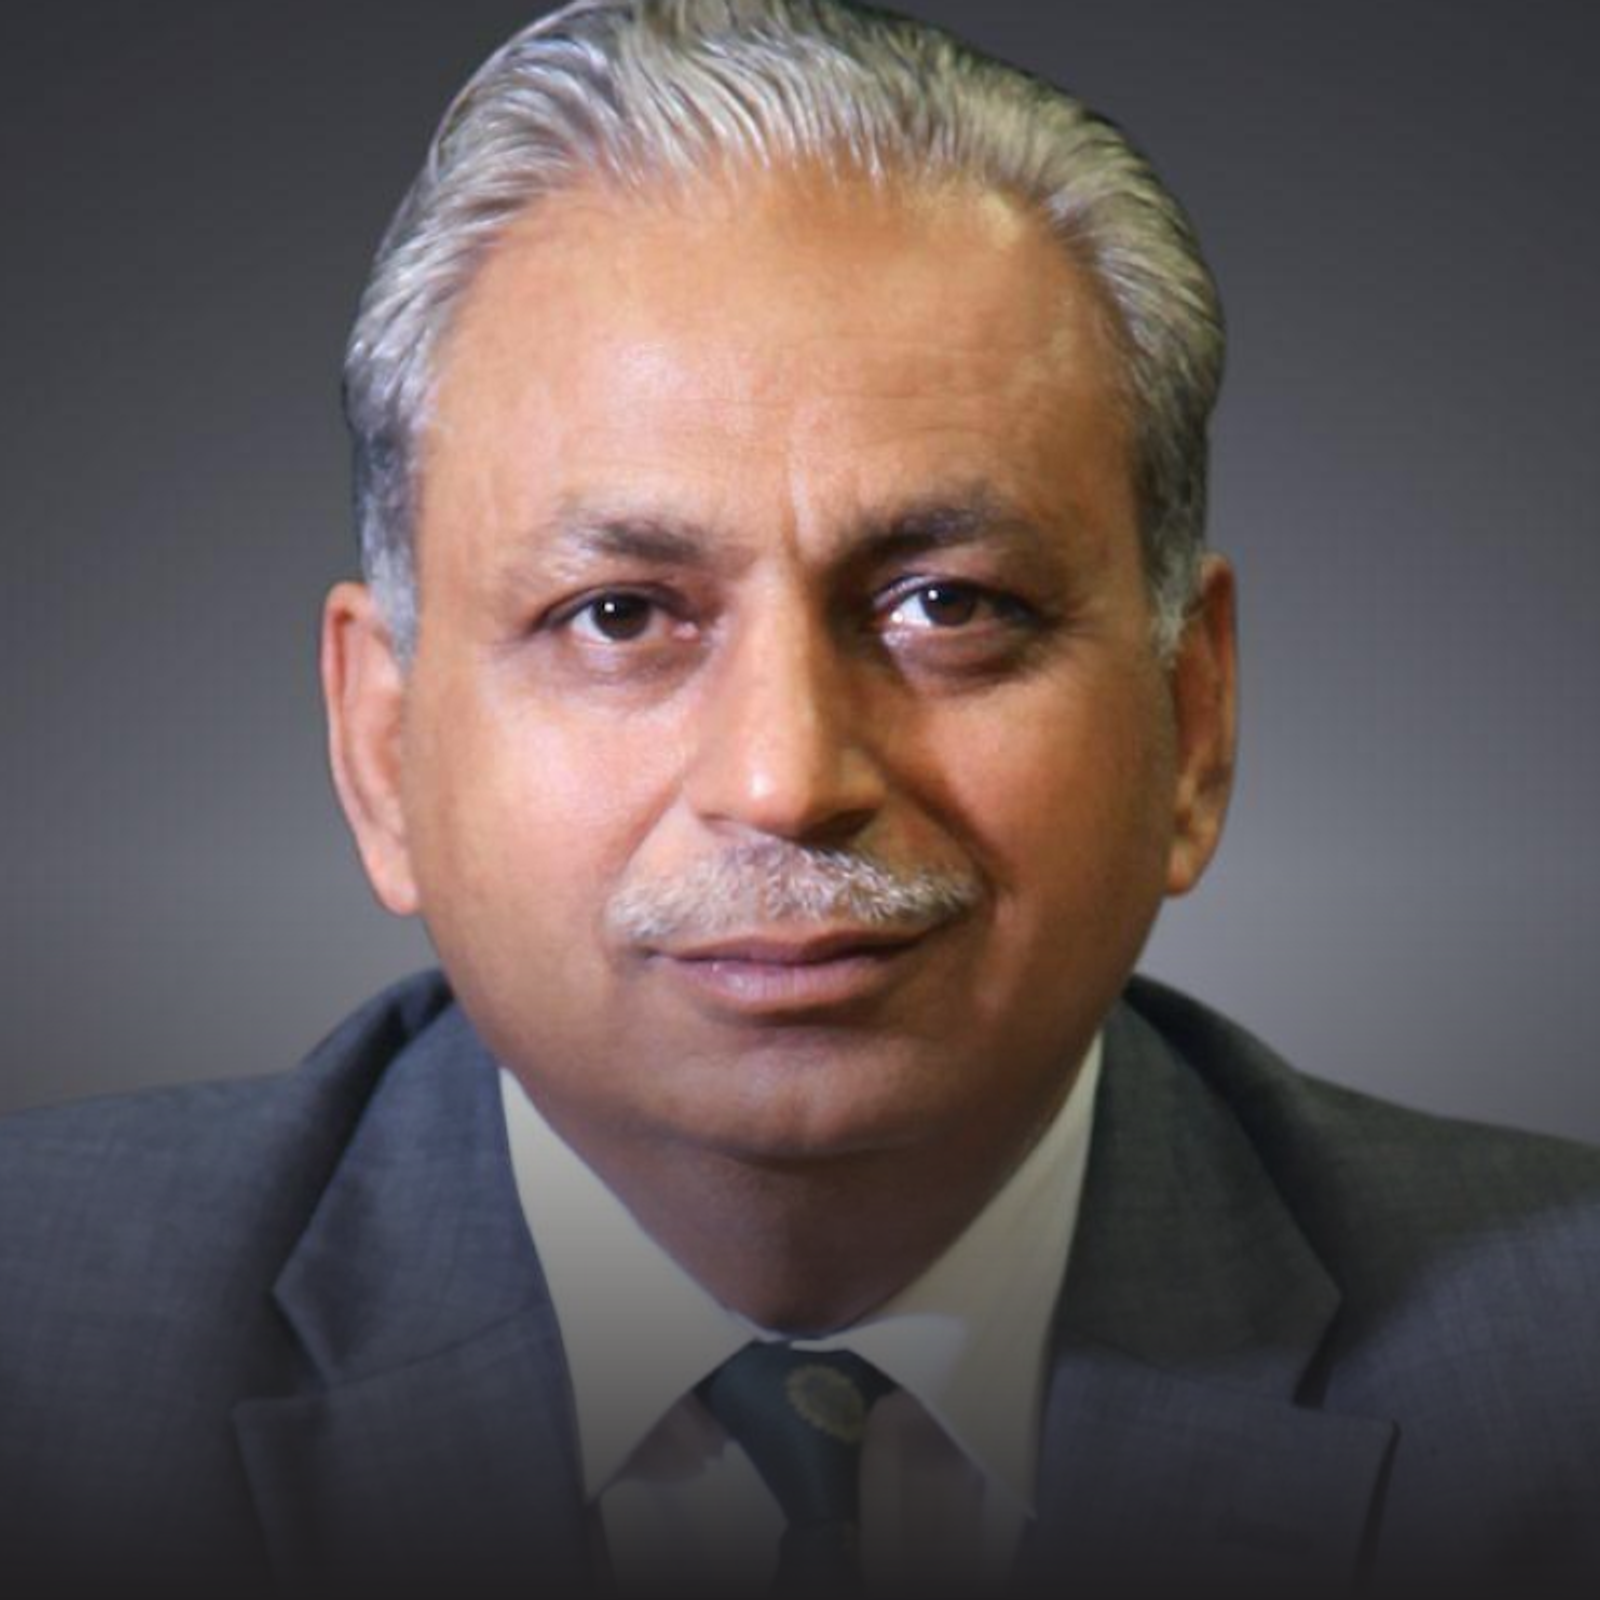 Former Tech Mahindra CEO CP Gurnani joins upGrad’s Board as Independent Director